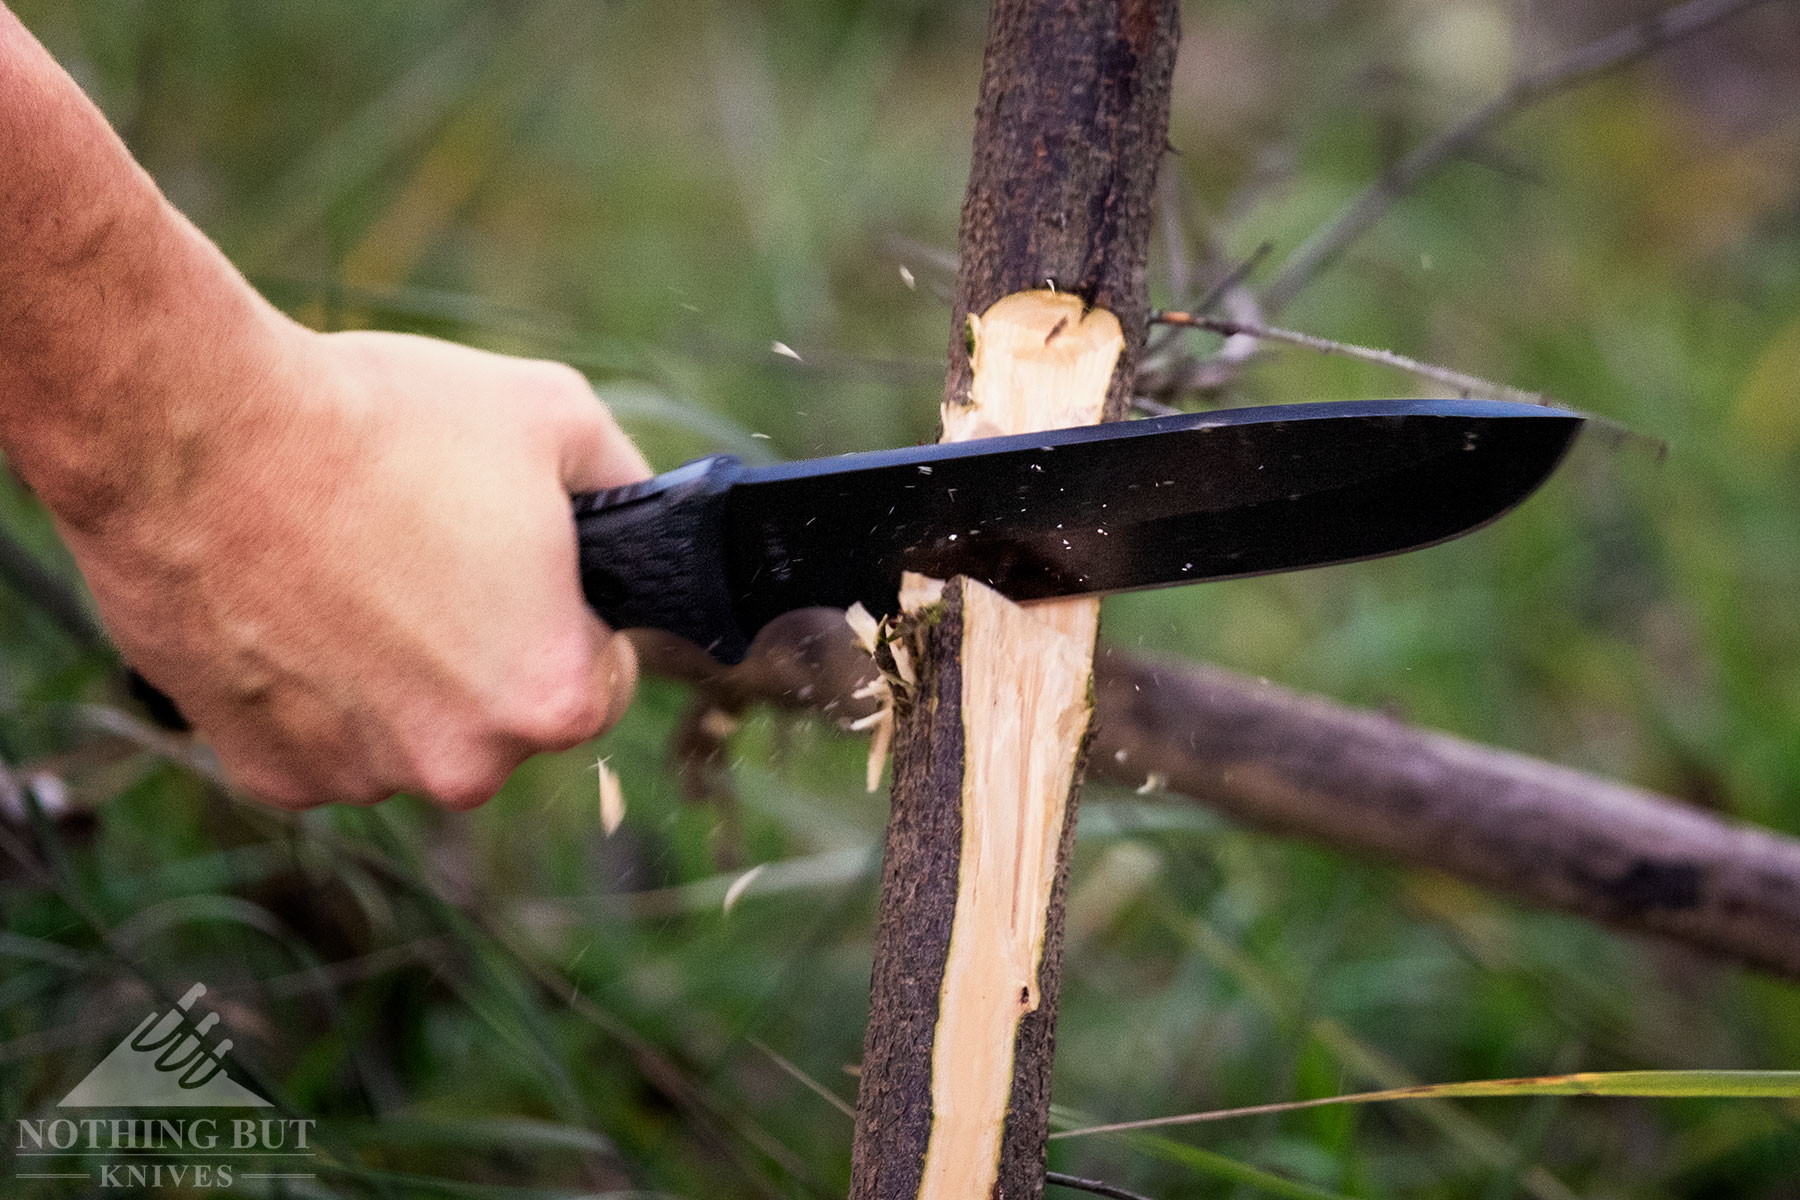 The Schrade SCHF 52 chopping through a vine with a blurred green field in the background.